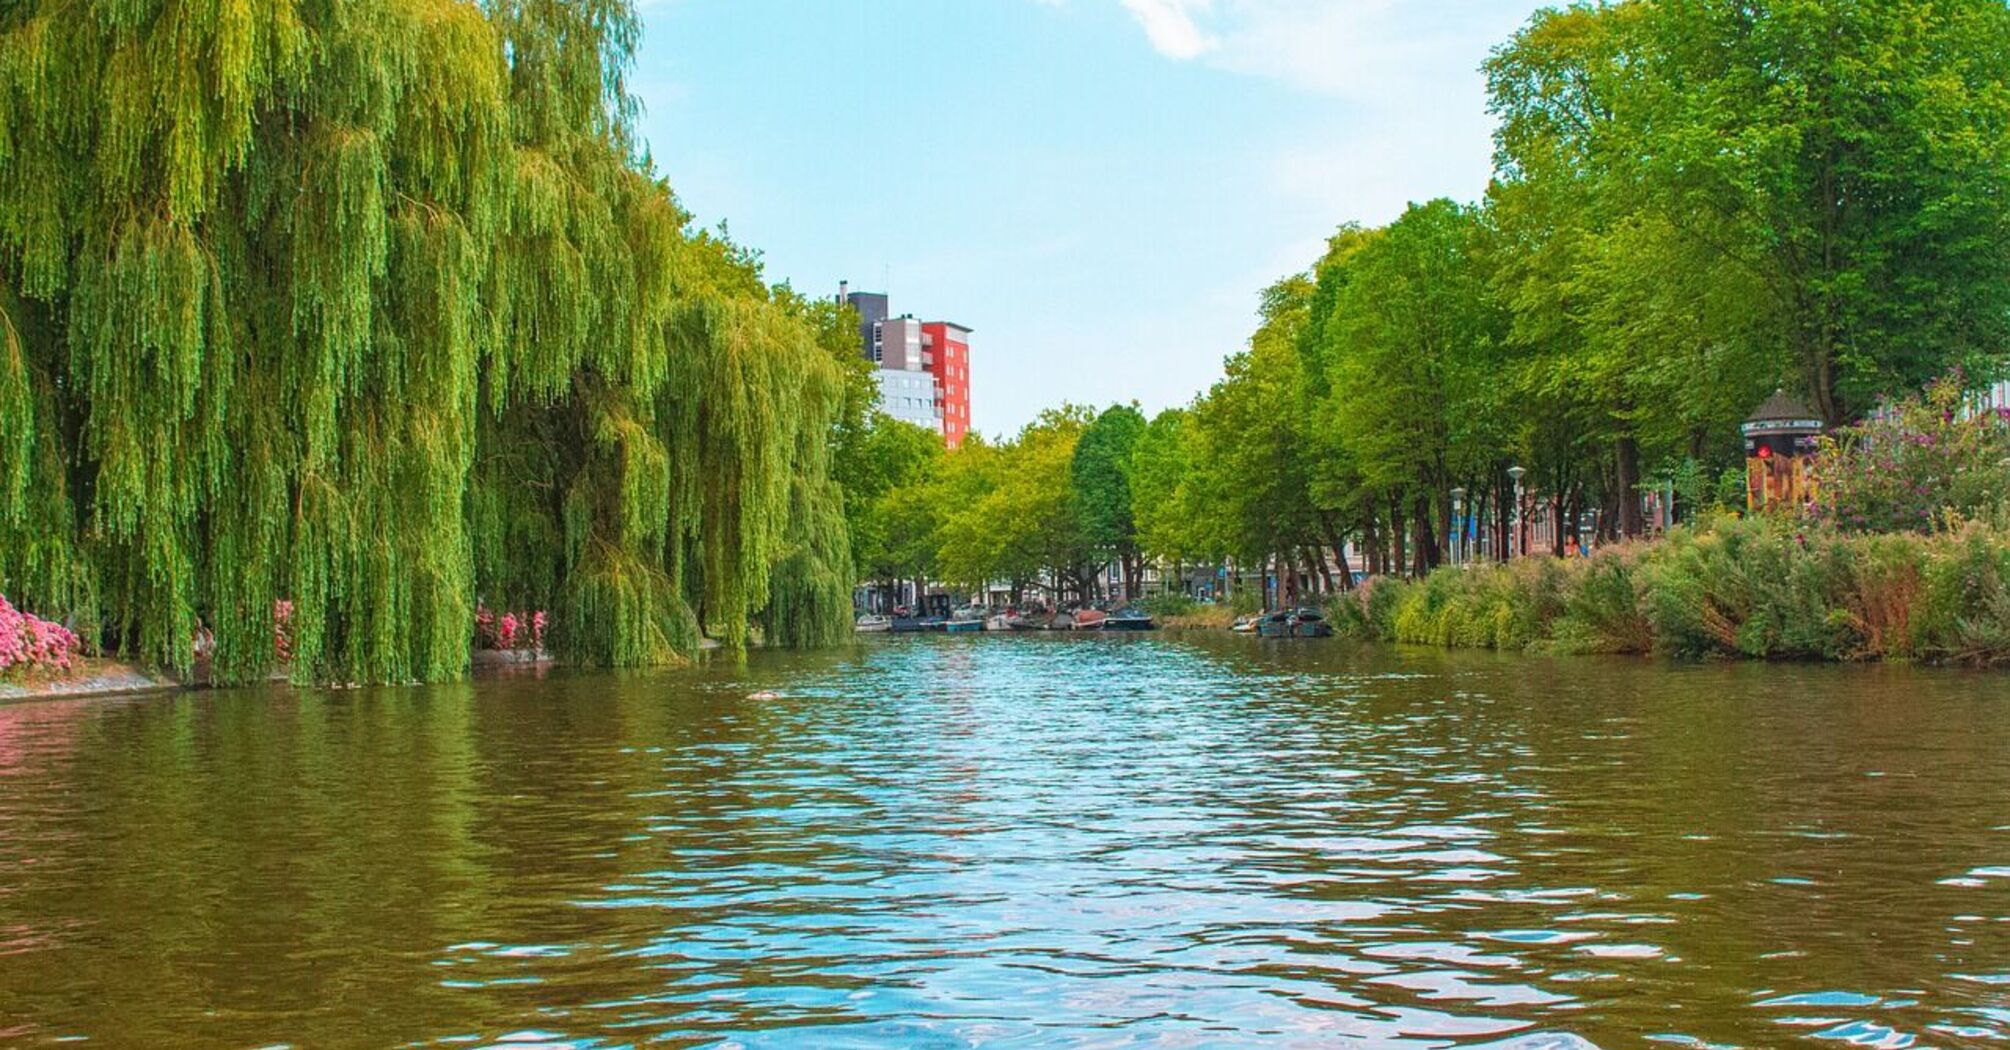 The best parks and gardens in Amsterdam: top 10 natural attractions of the capital